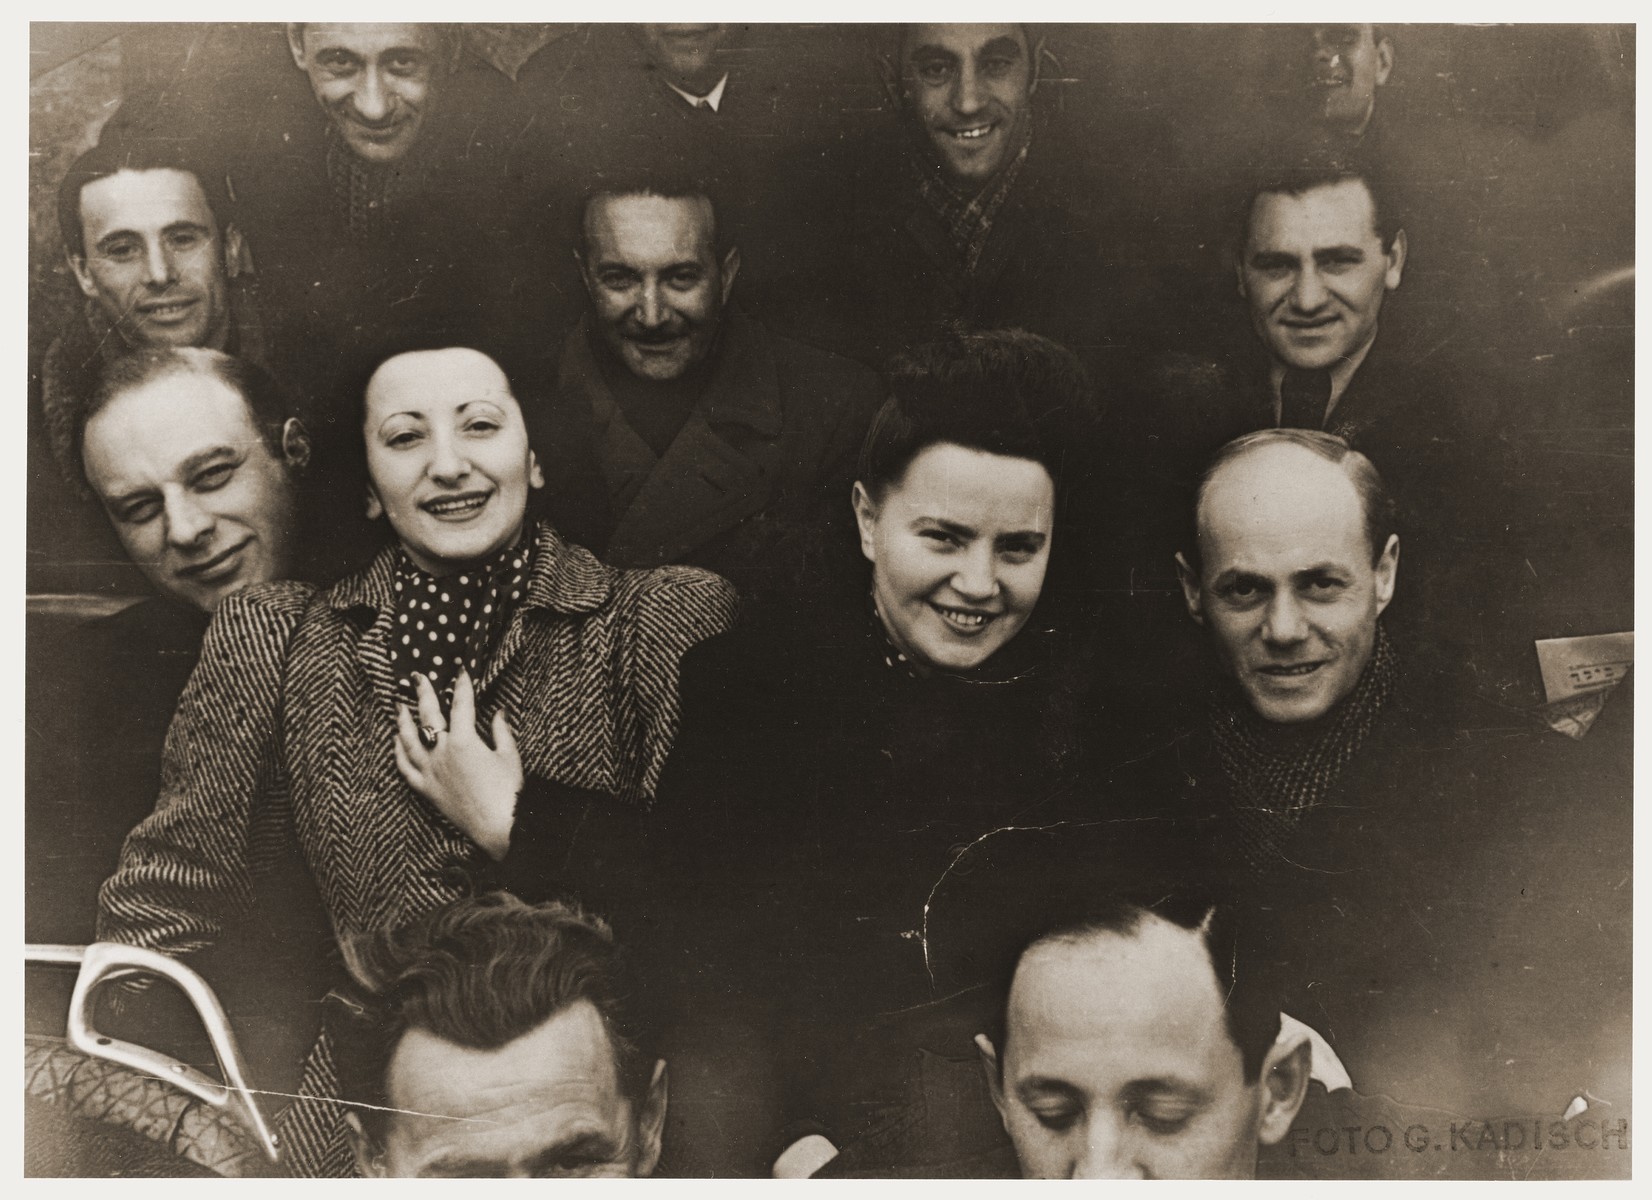 Members of the X-Concentration Camp Orchestra on their bus during a concert tour.   Henia Durmashkin is on the left.  Her sister, Fania Durmashkin Becker is beside her.  Fania's husband, Max Becker is in the back, second from the right.

Henia Durmashkin was born in Vilna in 1926.  She is the daughter of Sonia and Akiva Durmashkin, who was a highly-regarded musician, composer, and the conductor of the choir in the City Temple of Vilna.  The youngest Durmashkin, Henia had a sister, Fania, a trained pianist, and a brother, Wolf, a child prodigy and later, a renowned conductor.  Henia's vocal talent was discovered early.  While in the second grade at the Tarbut Gymnasium, Henia performed songs for Hayyim Bialik at a program honoring his visit.  The songs were Bialik's poems put to music composed by Akiva Durmashkin.  Henia went on to study at the Conservatory of Music in Vilna, and in 1940, she was the only Jew accepted to the City Choir of Vilna.  In the summer of 1941, Henia and her family were moved into the Vilna Ghetto, and soon after, Akiva was arrested and deported during an action.  In 1942, the Hebrew Ghetto Choir of Vilna gave its first concert under the direction of Wolf Durmashkin with Henia and Fania both participating.  The Vilna Ghetto was liquidated in September 1943.  Sonia Durmashkin was too frail to be selected for labor.  Wolf was deported to labor camps in Estonia.  Henia and Fania were sent to Riga, and for the next two years, to a number of other labor camps.  In one camp, Henia met Abrasha Stupel, a violinist.  Henia and Fania were liberated on a death march from Dachau, May 1, 1945, by the U.S. Army.  Soon after, Henia was invited by Abrasha Stupel to join a group of musicians gathered at St. Ottilien DP Hospital.  They called themselves the "St. Ottilien Orchestra," the "X-Concentration Camp Orchestra," and finally the "Representative Orchestra of the She'erit Ha-Peletah."  In 1946, the orchestra relocated from St. Ottilien to Fuerstenfeldbruck.  They were employed by the JDC, UNRRA, and IRO to play at DP camps throughout the U.S. and British zones of Germany.  During her travels, Henia learned that her beloved brother, Wolf Durmashkin, had been killed along with other inmates of Klooga, one hour before the liberation of the camp.  In 1948, Leonard Bernstein traveled to Germany to conduct the Munich Symphony Orchestra.  In May, in a Munich theatre, he accompanied Henia for two Hebrew songs. Henia Durmashkin immigrated to the United States, where she and her sister, Fania, continued to perform.